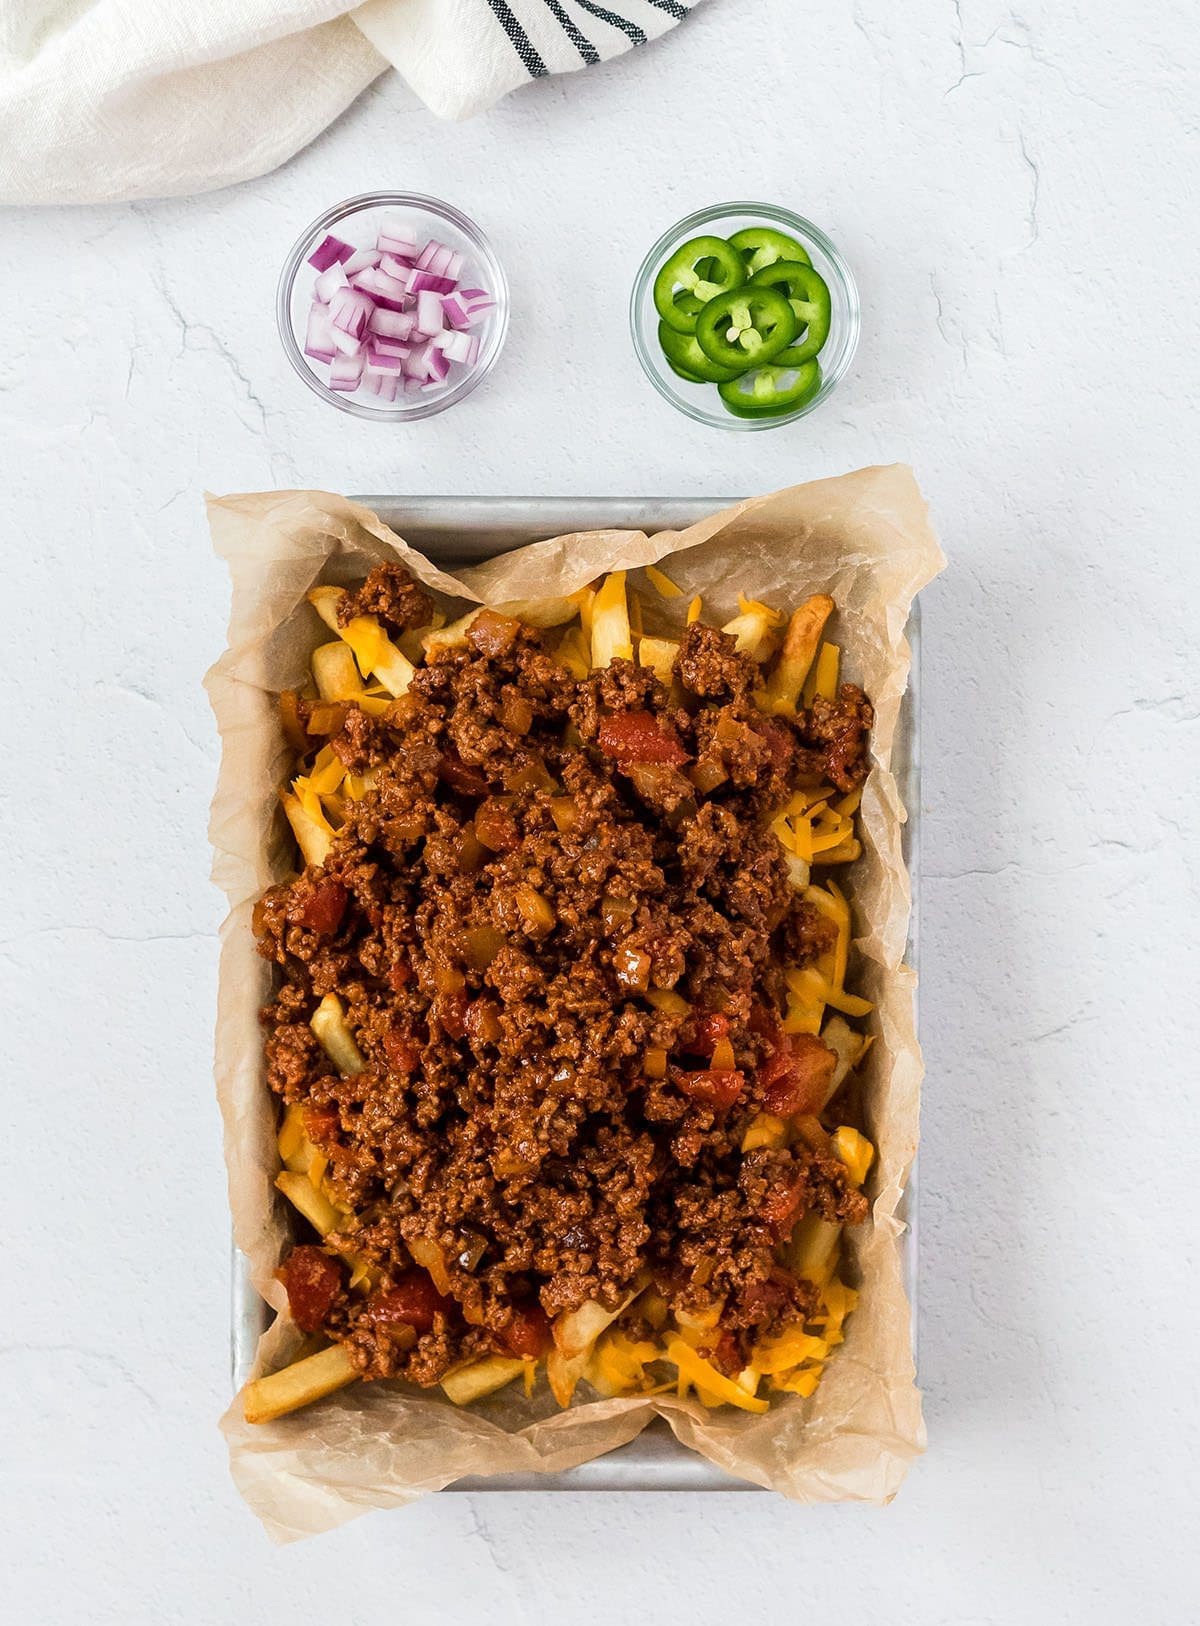 Chili on top of french fries.